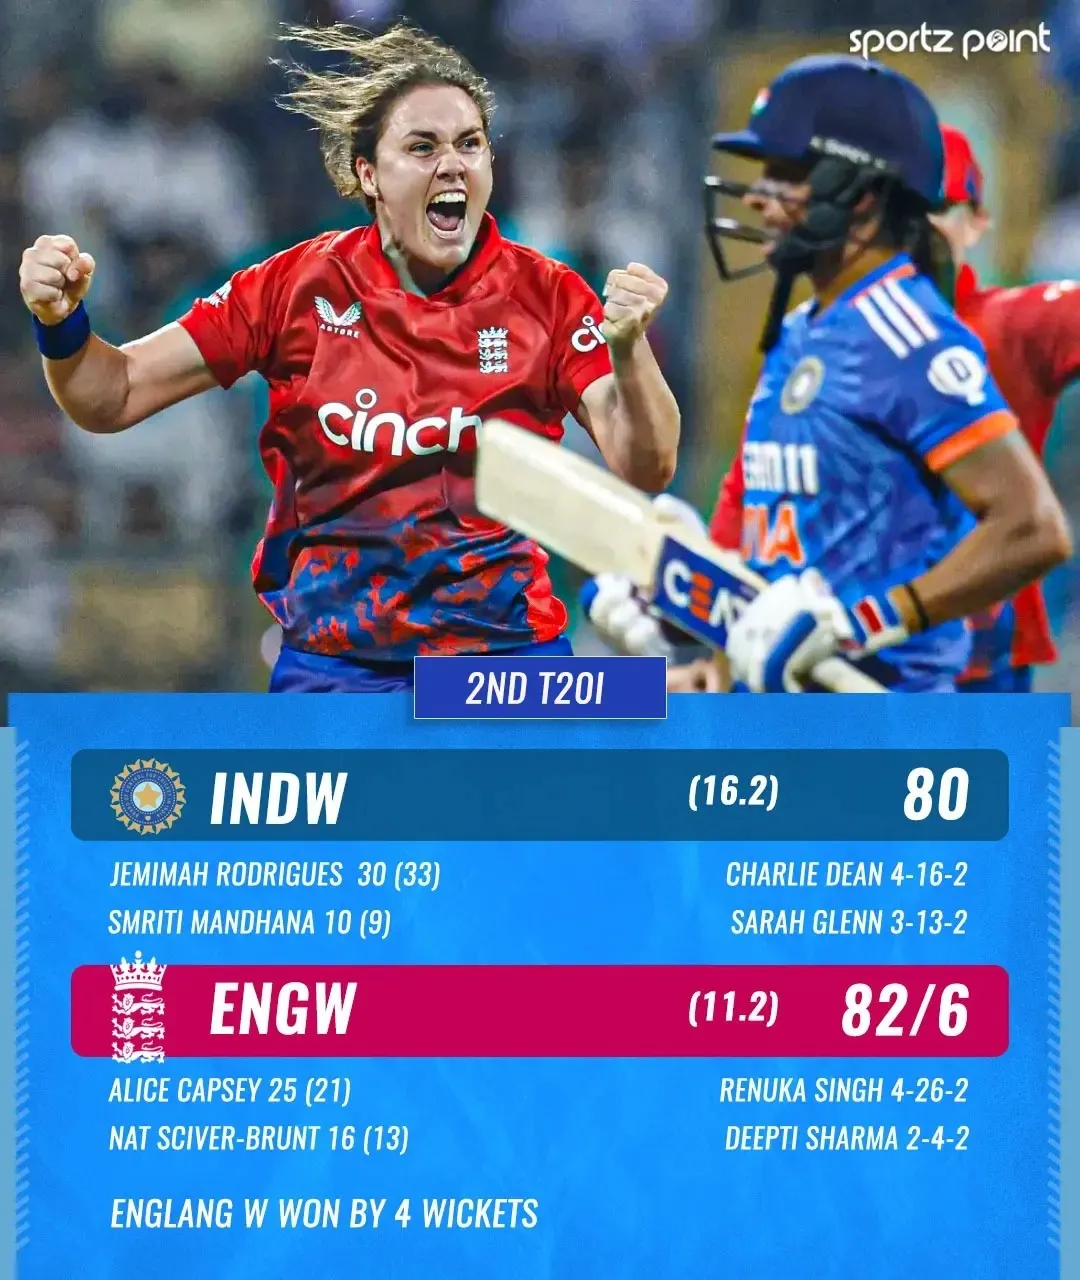 England Women defeated Indian Women's Cricket team by 4 wickets to win the series with one game to go.   